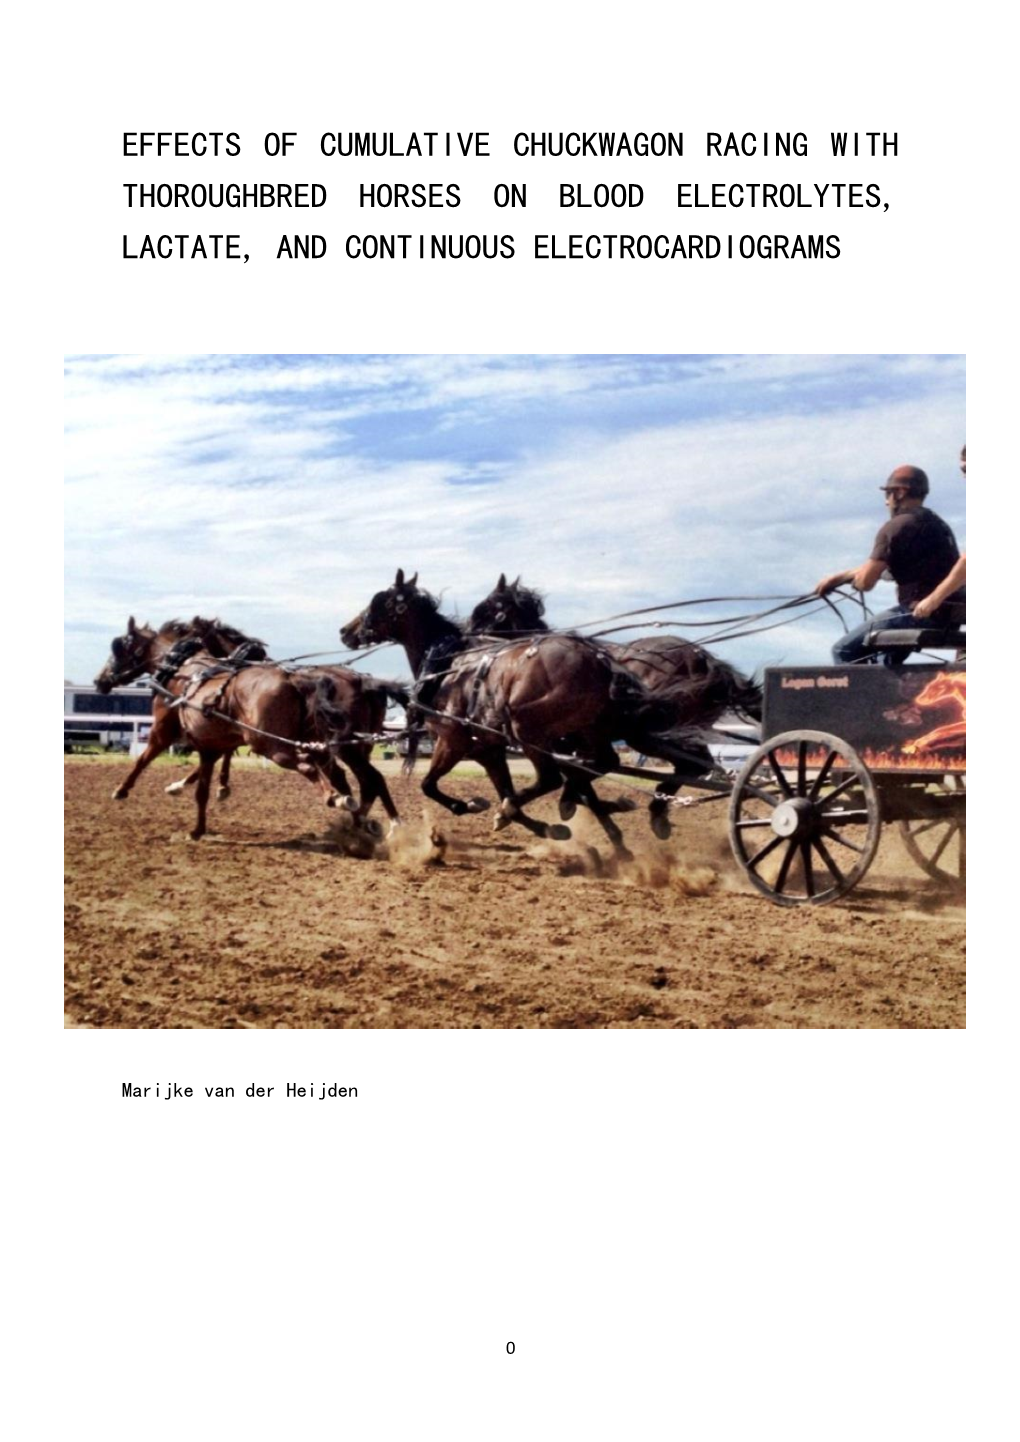 Effects of Cumulative Chuckwagon Racing with Thoroughbred Horses on Blood Electrolytes, Lactate, and Continuous Electrocardiograms